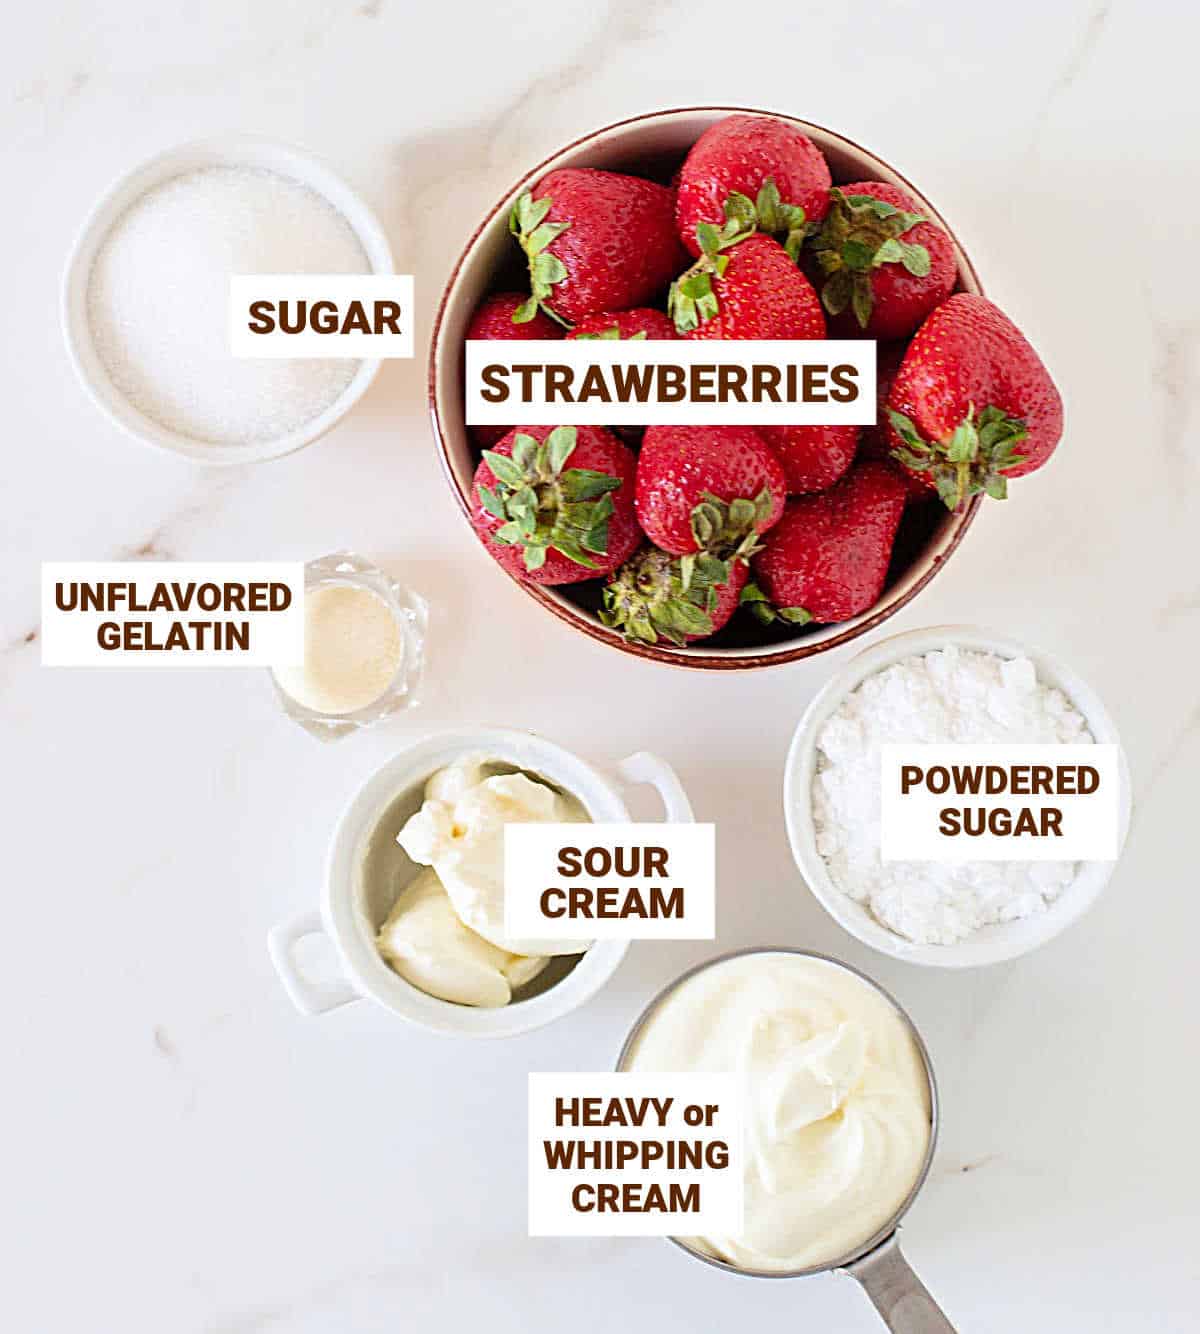 Bowls with ingredients for strawberry tart filling including cream, sugar, sour cream, gelatin. White surface.